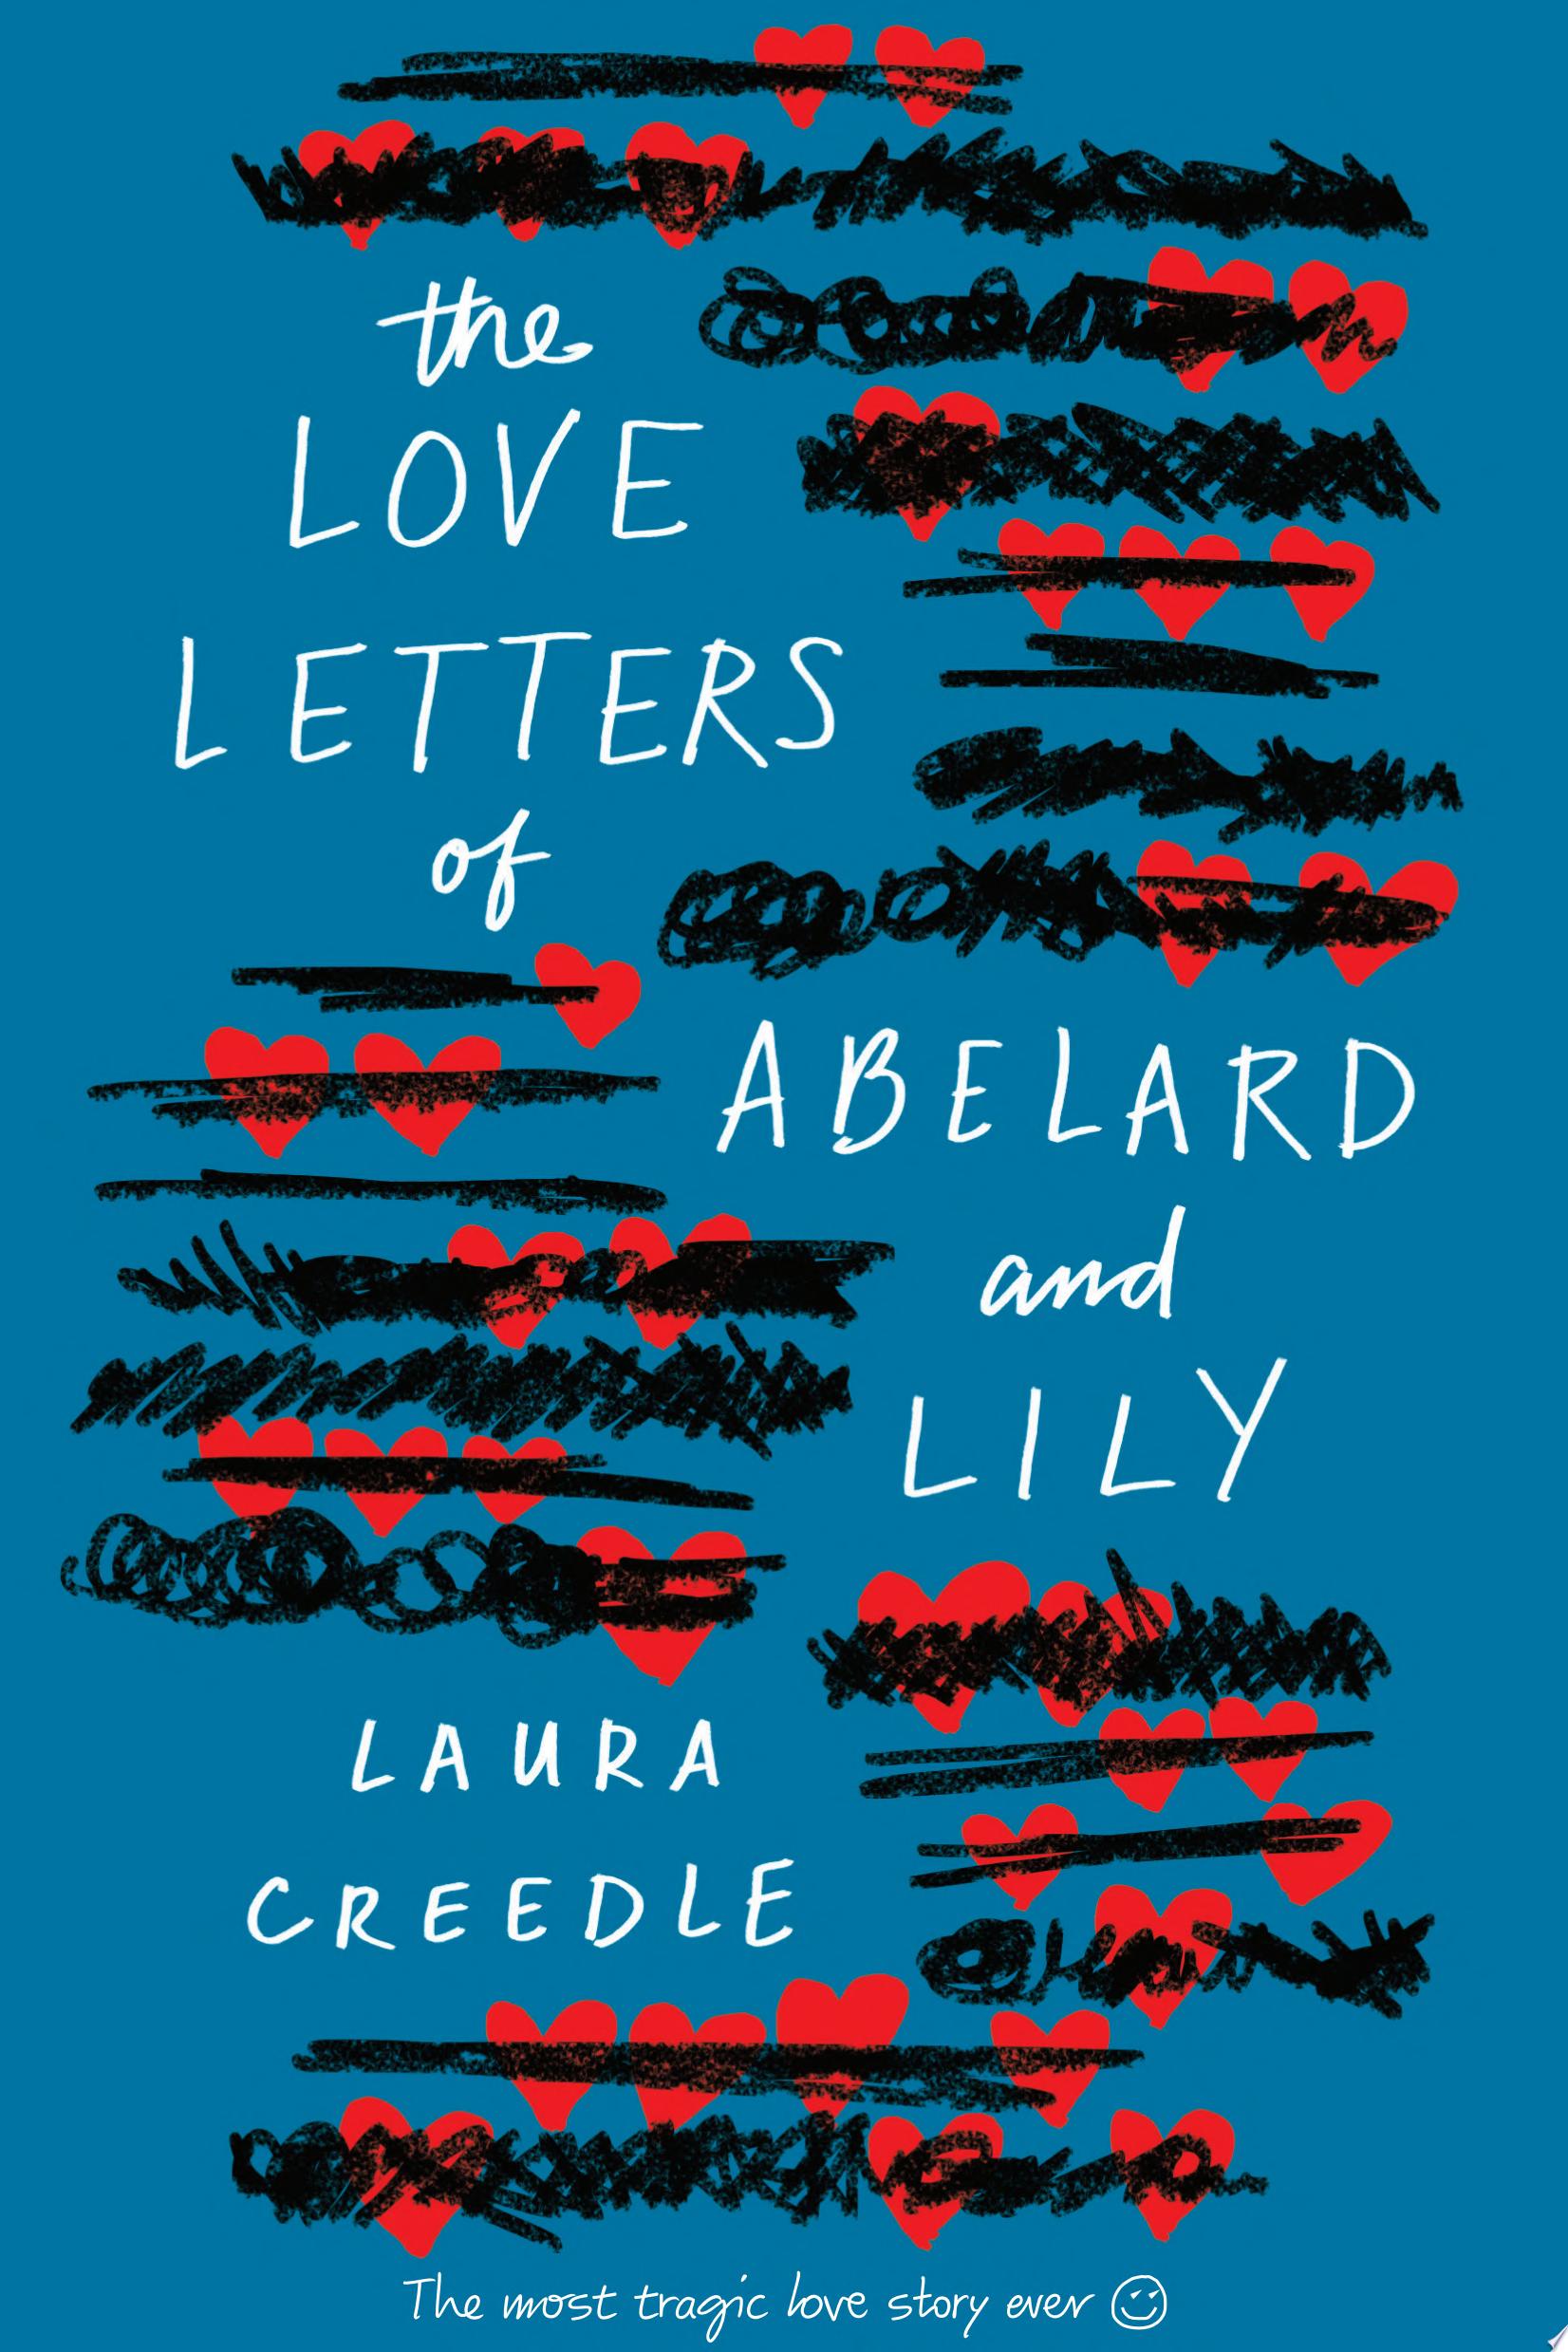 Image for "The Love Letters of Abelard and Lily"